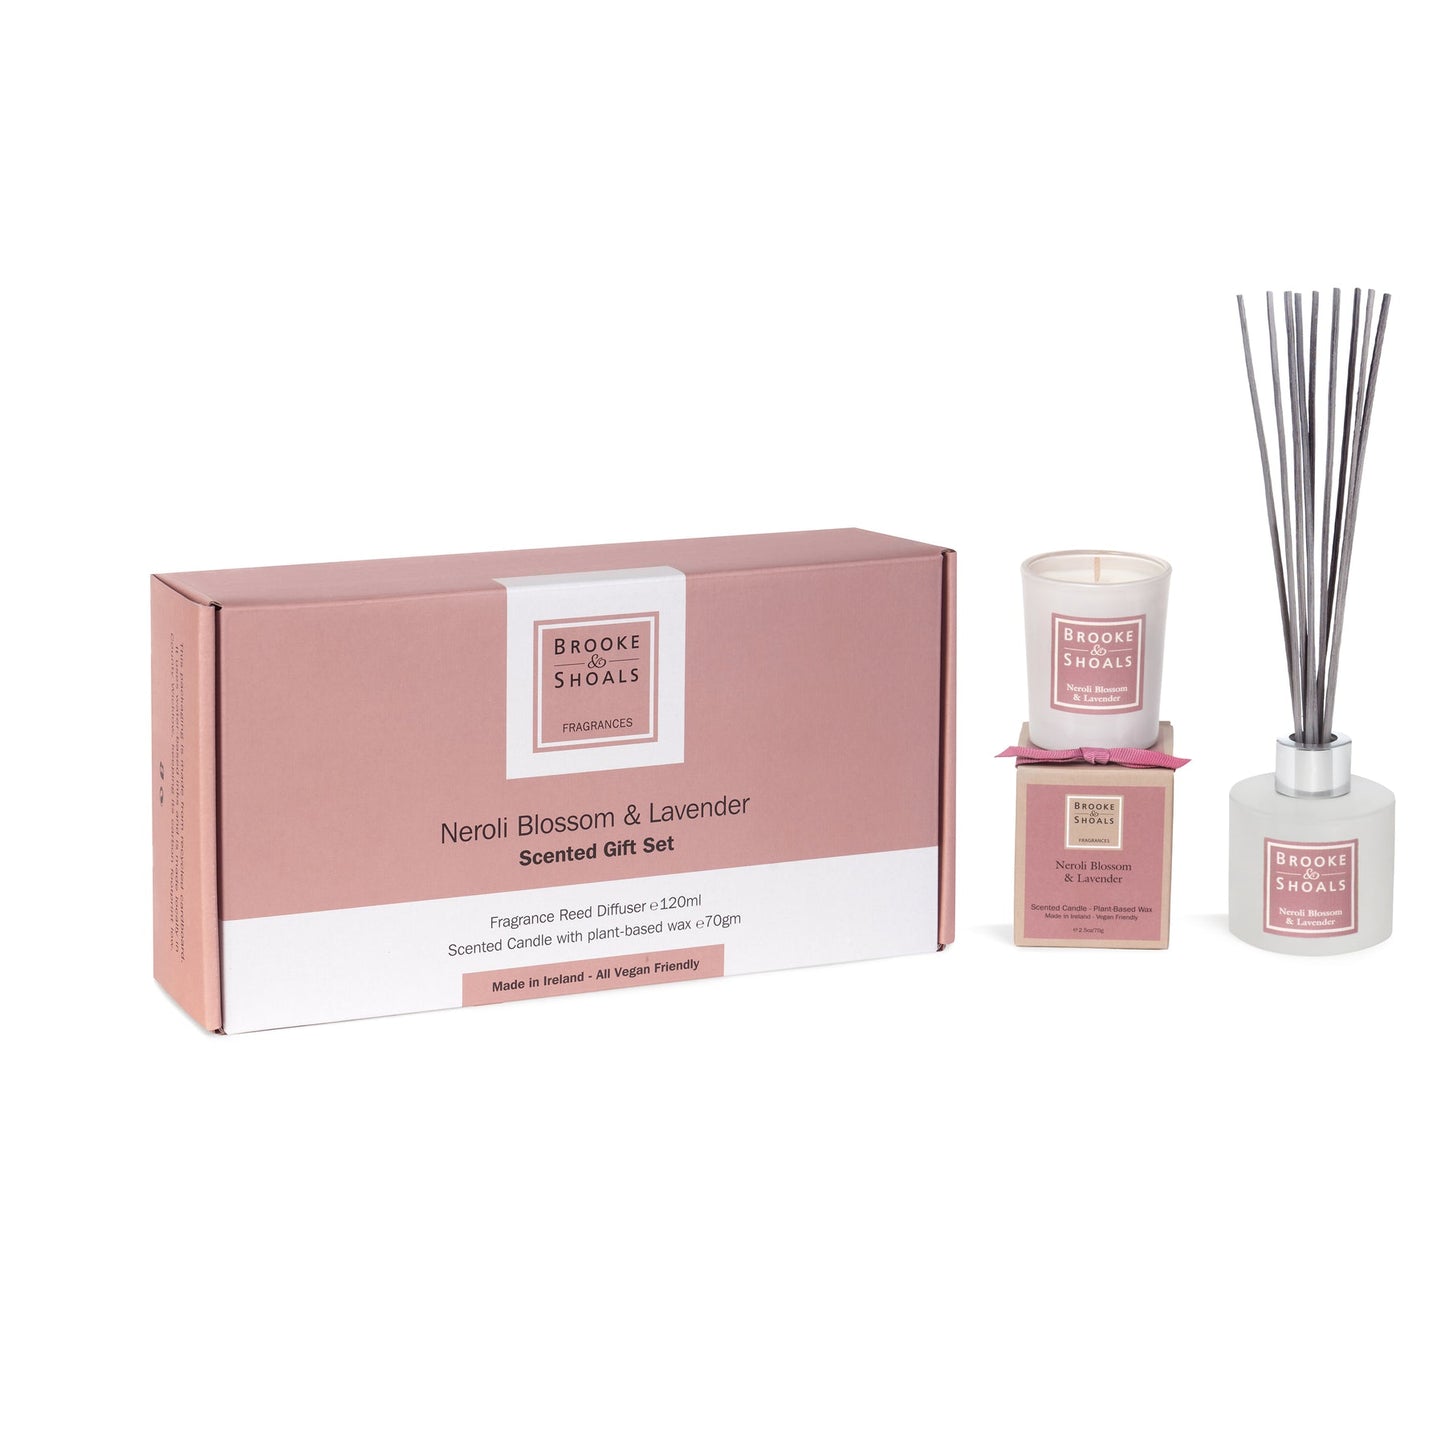 Brooke & Shoals Diffuser & Small Candle Gift Set - Neroli Blossom and Lavender